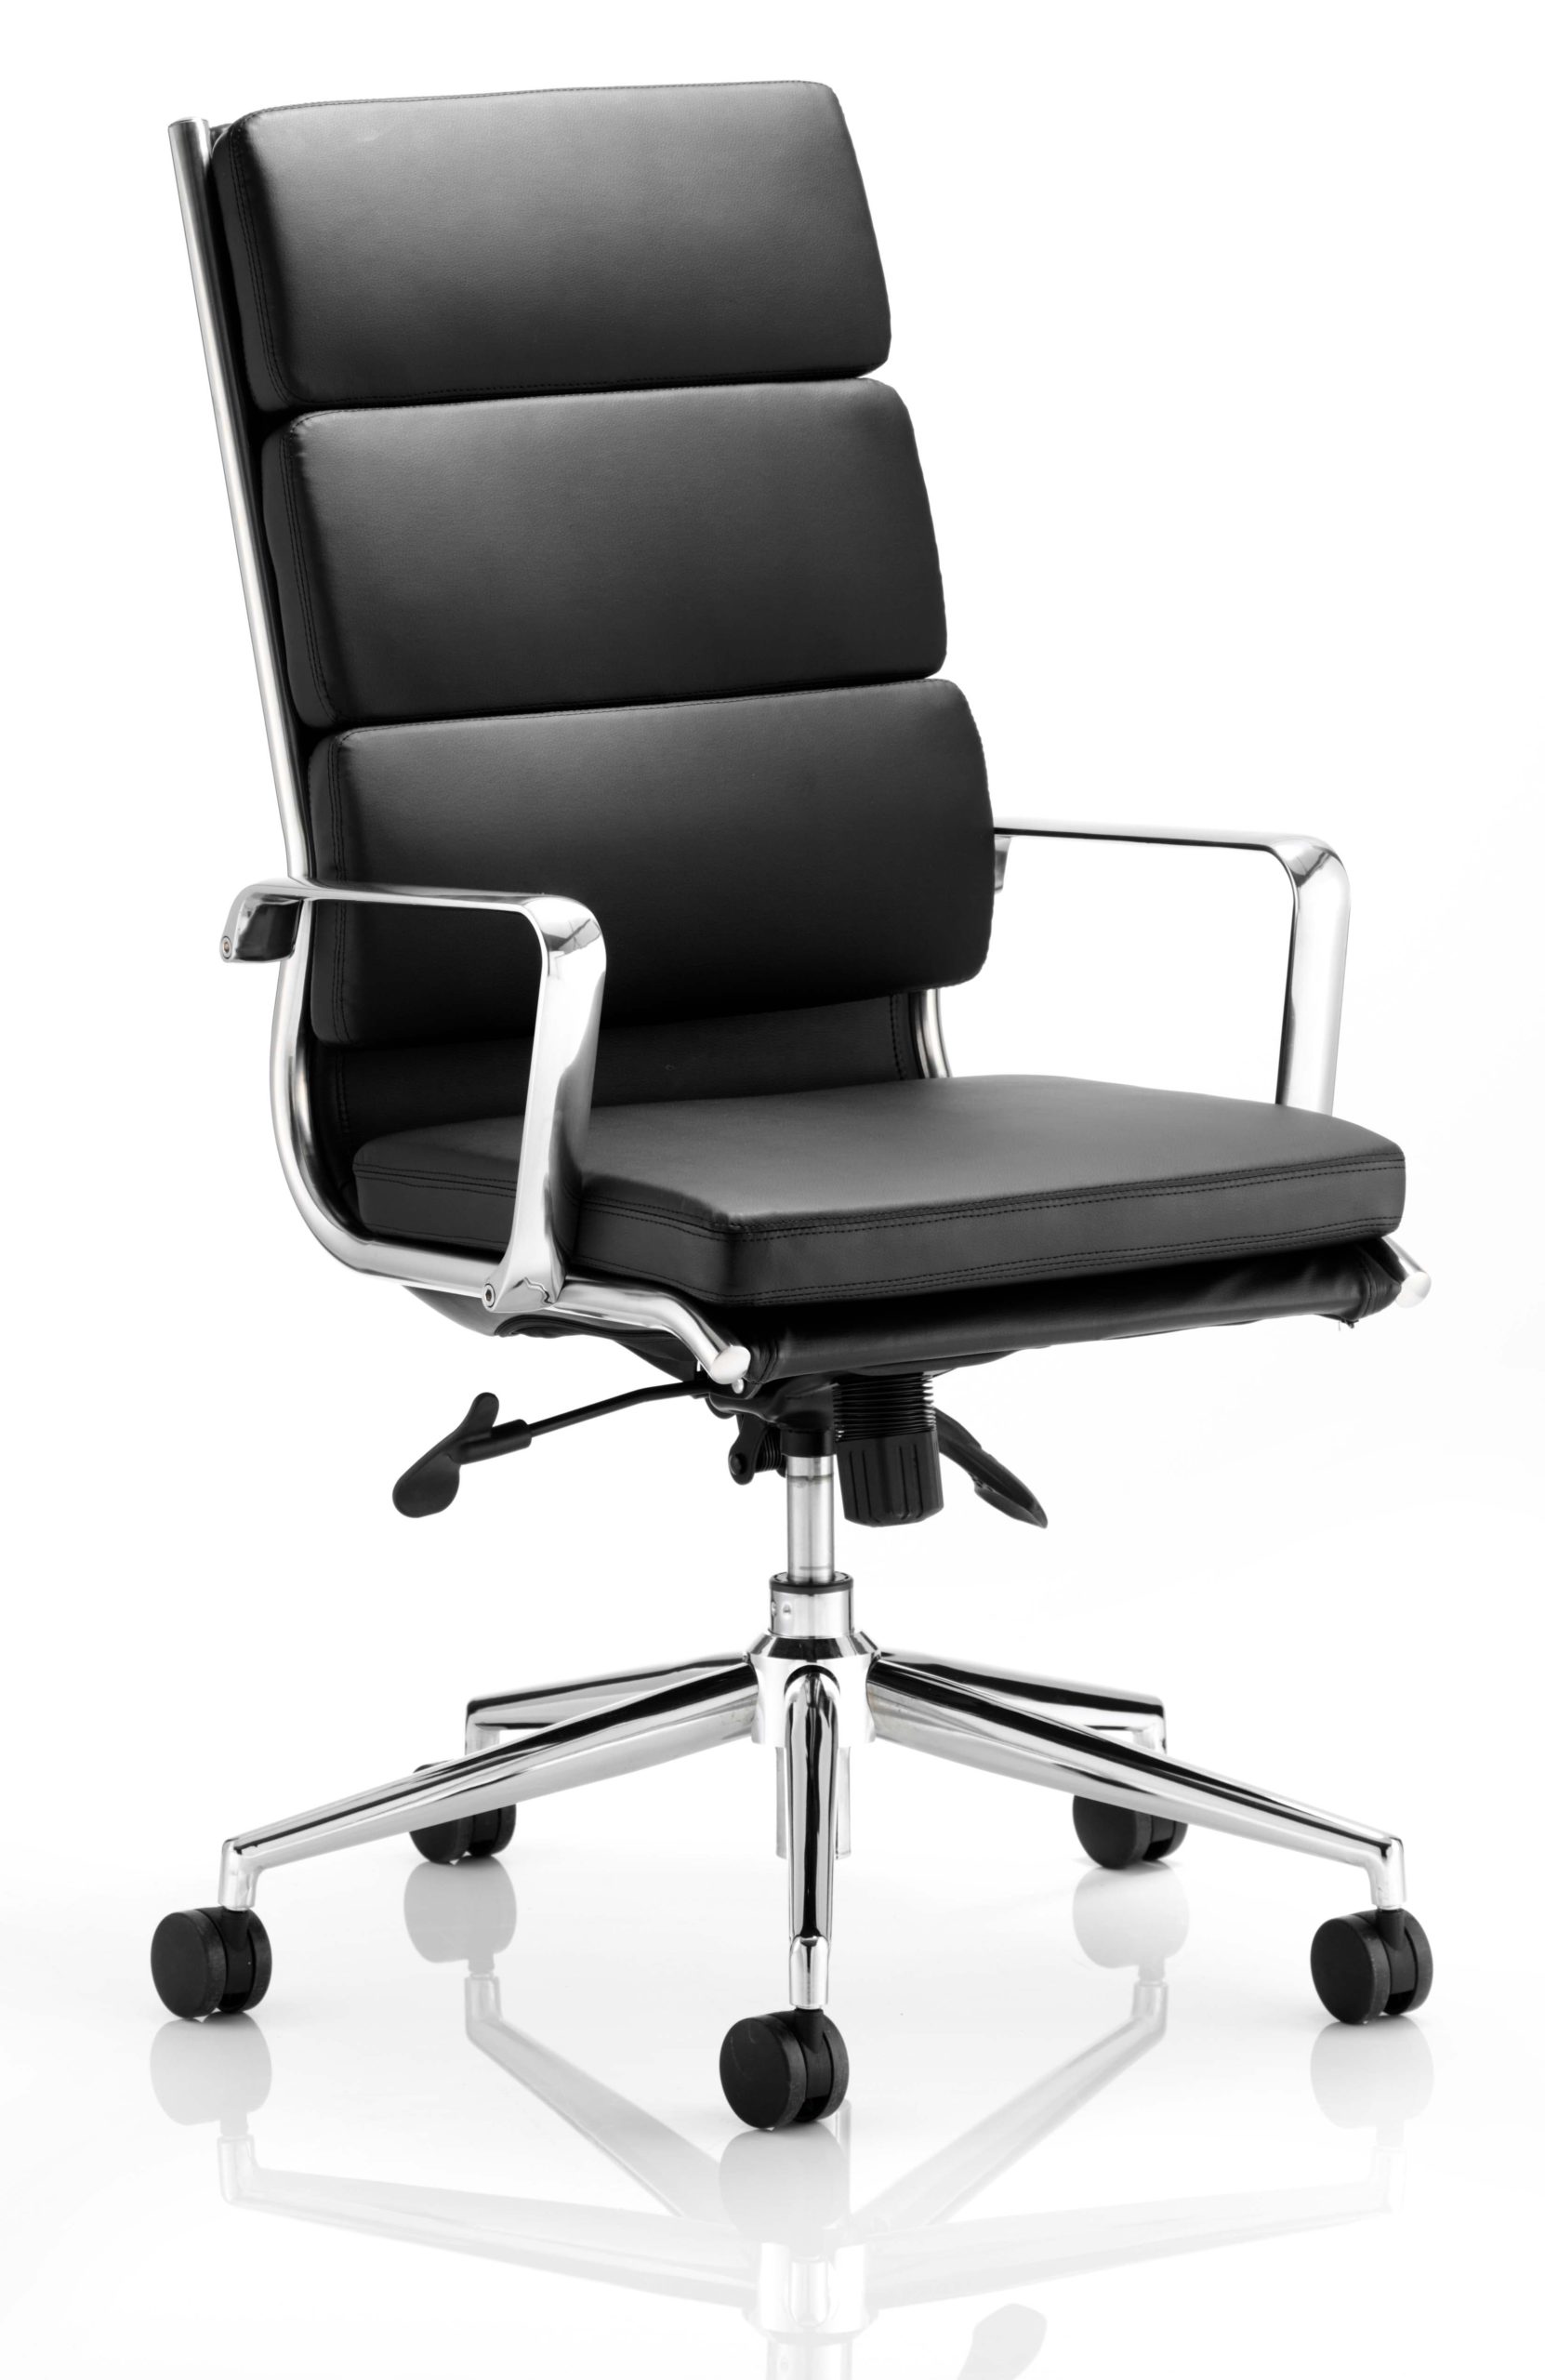 Sava Soft Bonded Leather High Office Chair Arms